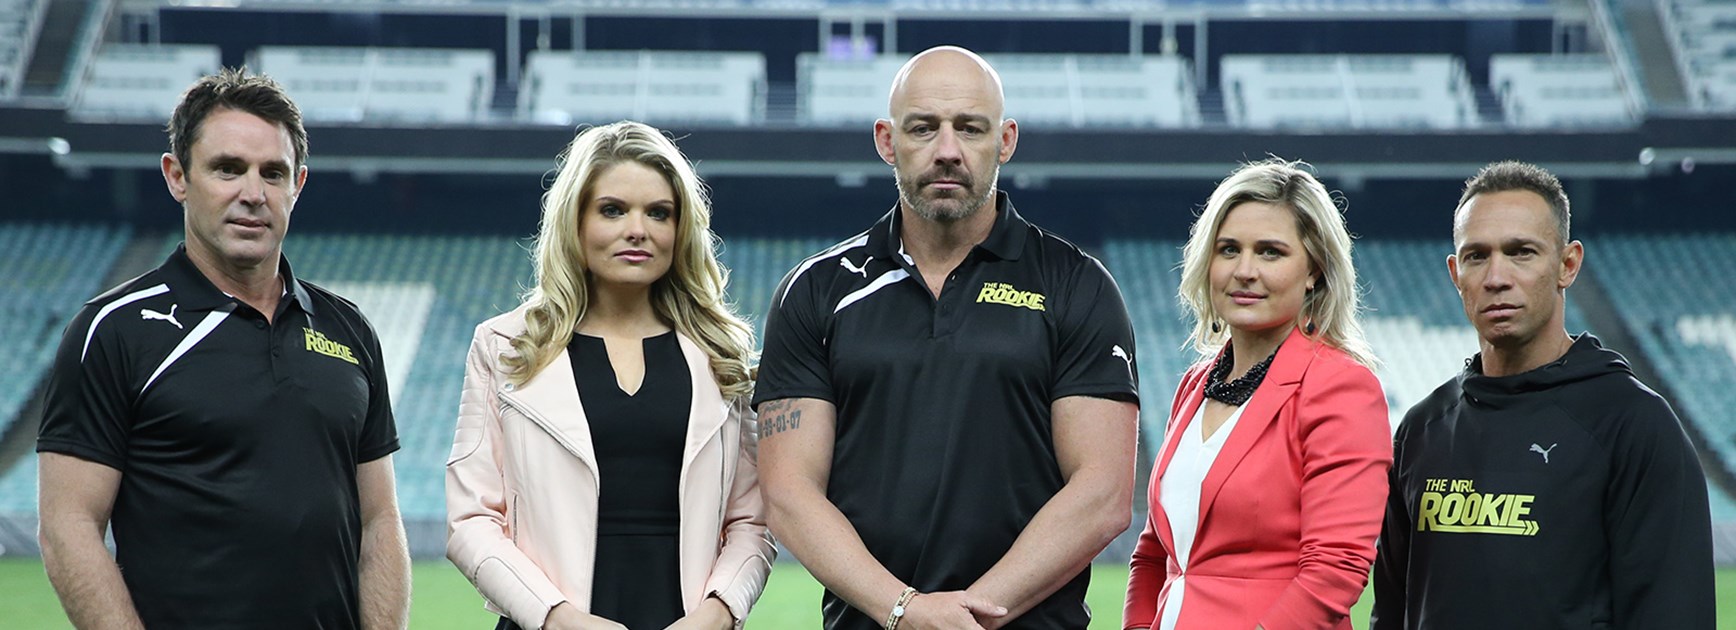 Brad Fittler, Erin Molan, Mark Geyer, Kate Baecher and Adrian Lam from The NRL Rookie.